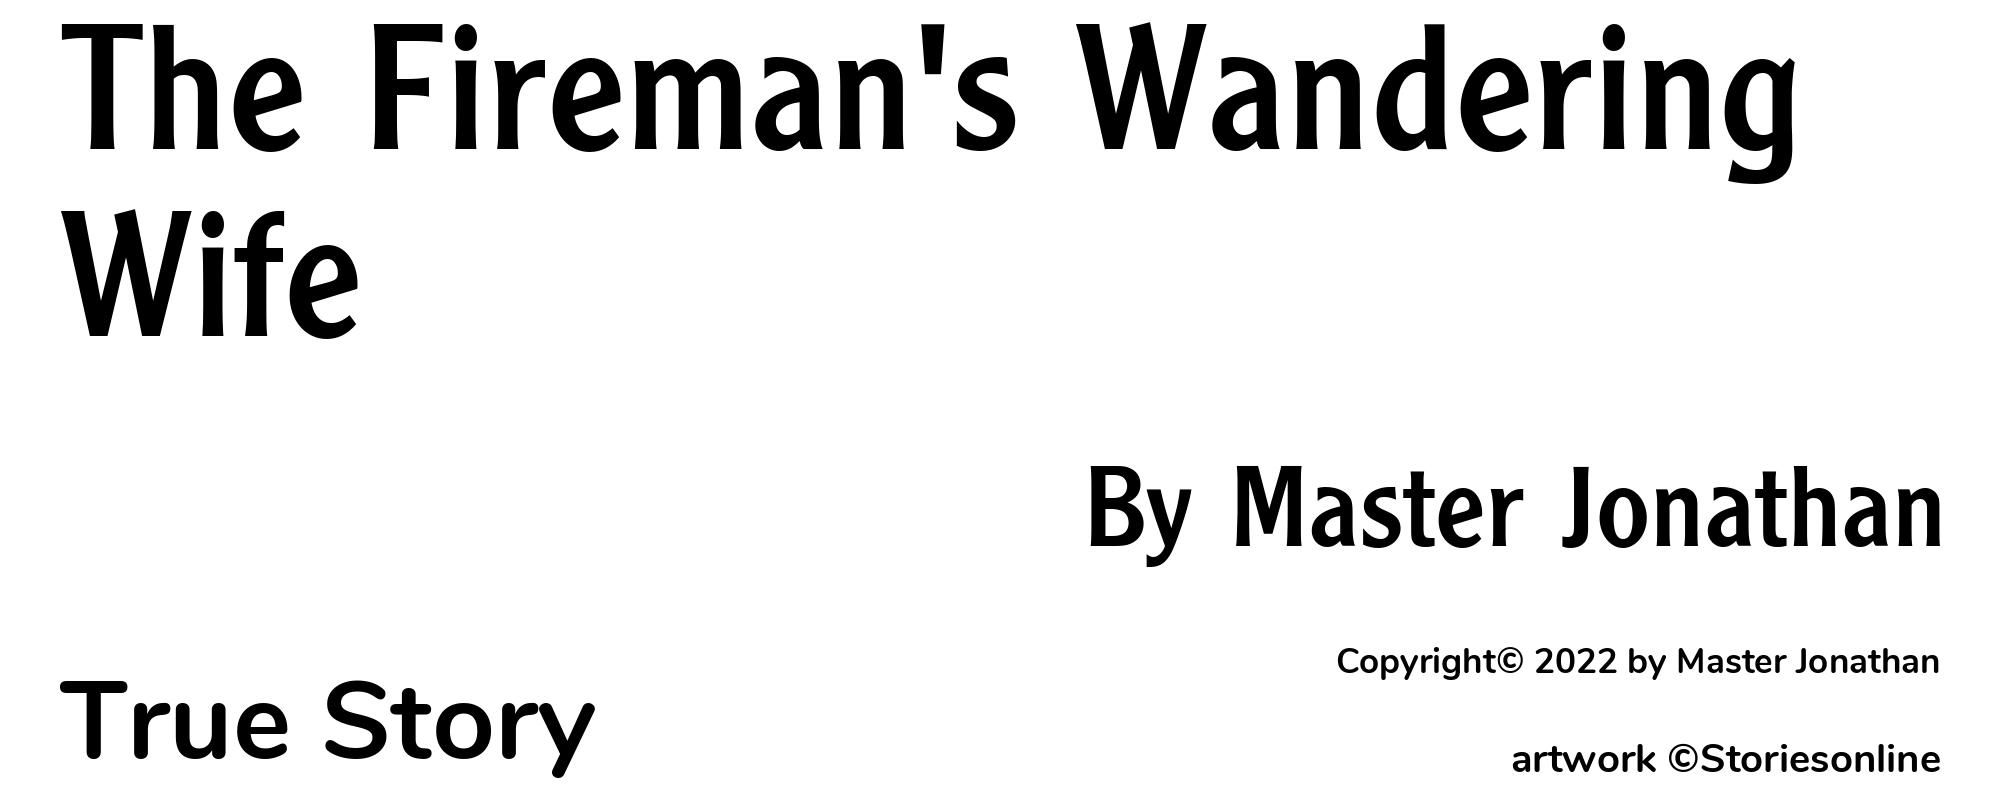 The Fireman's Wandering Wife - Cover